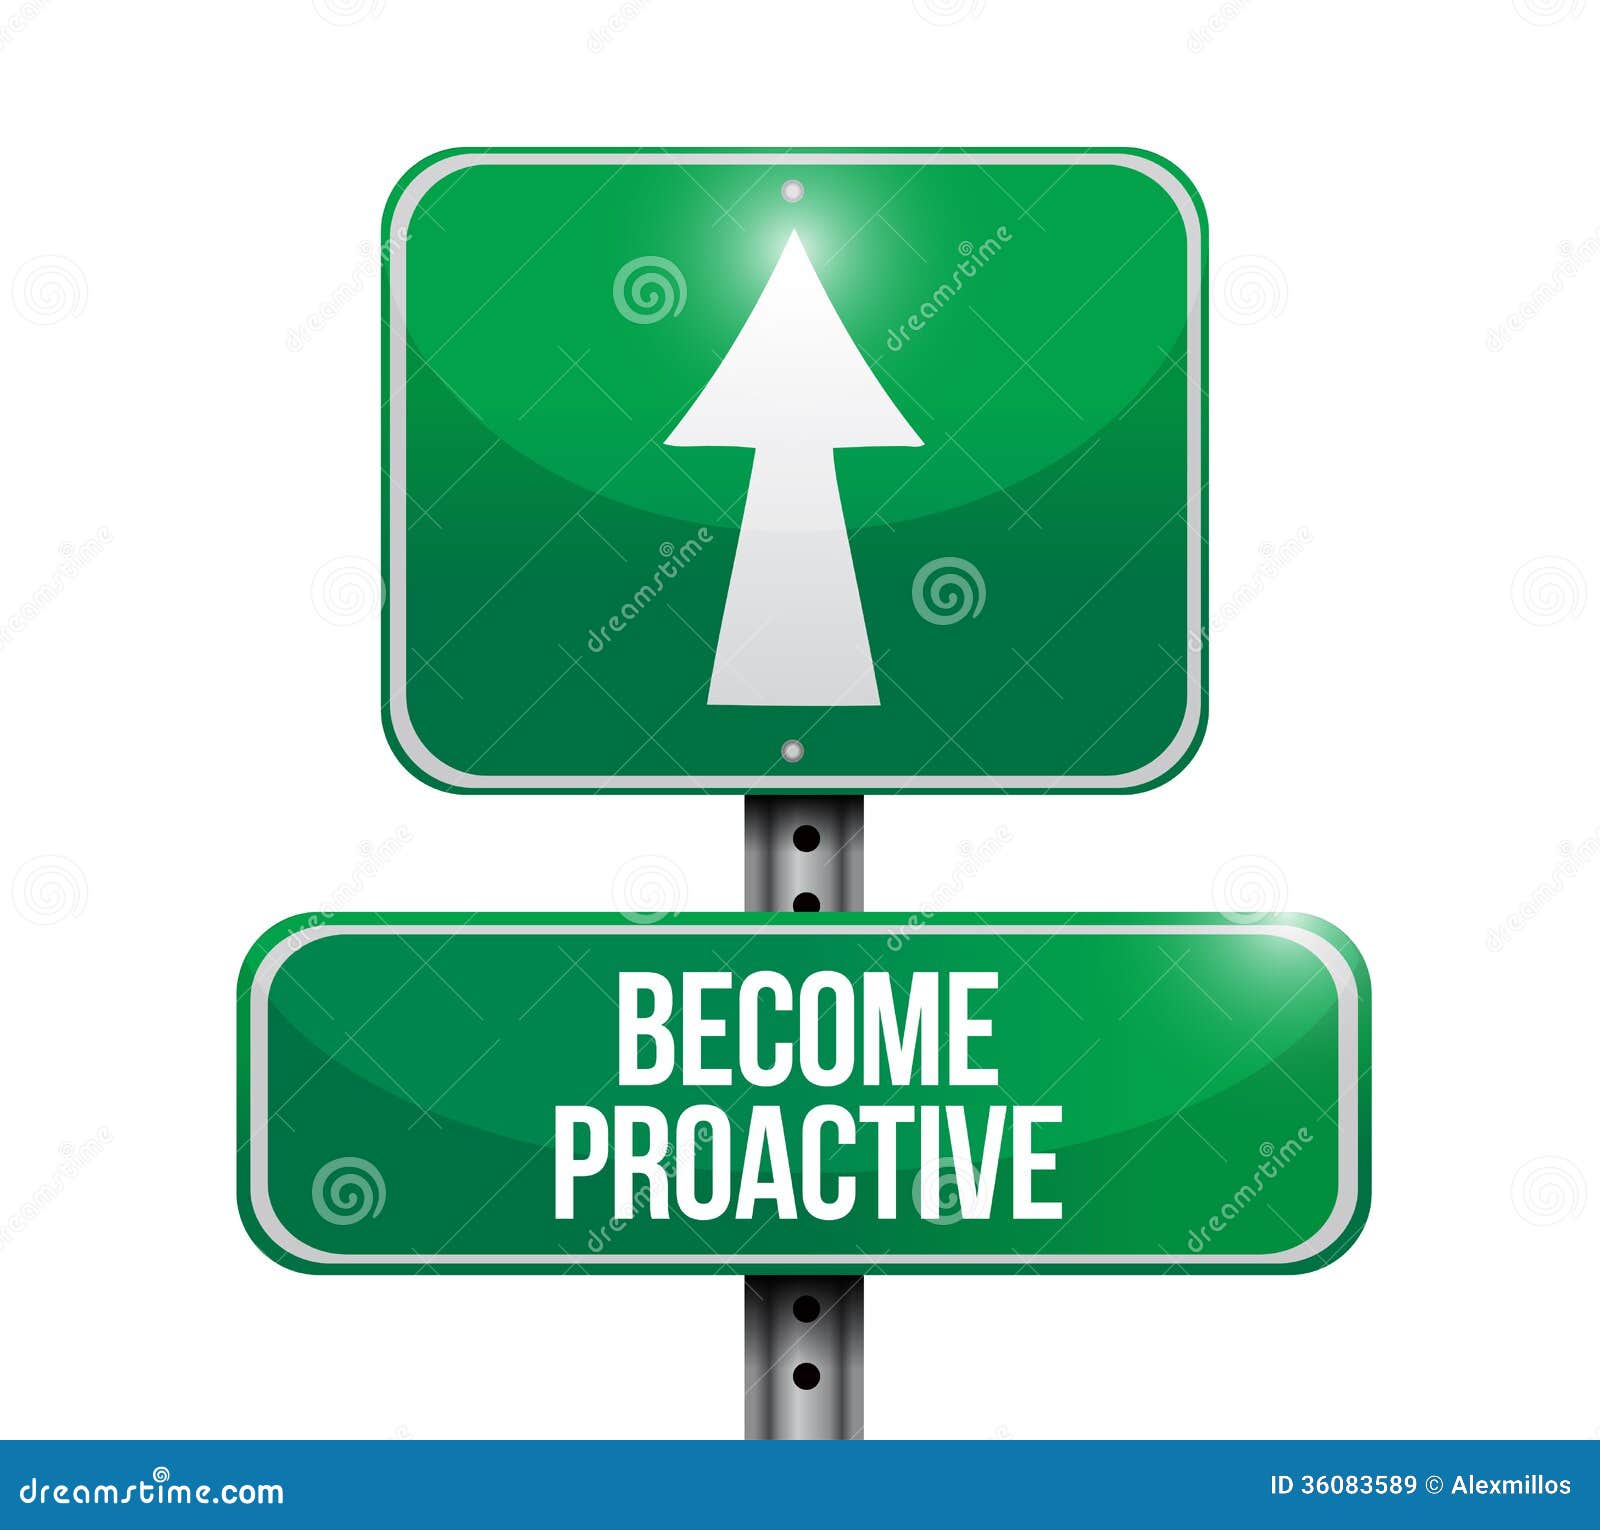 become proactive road sign  